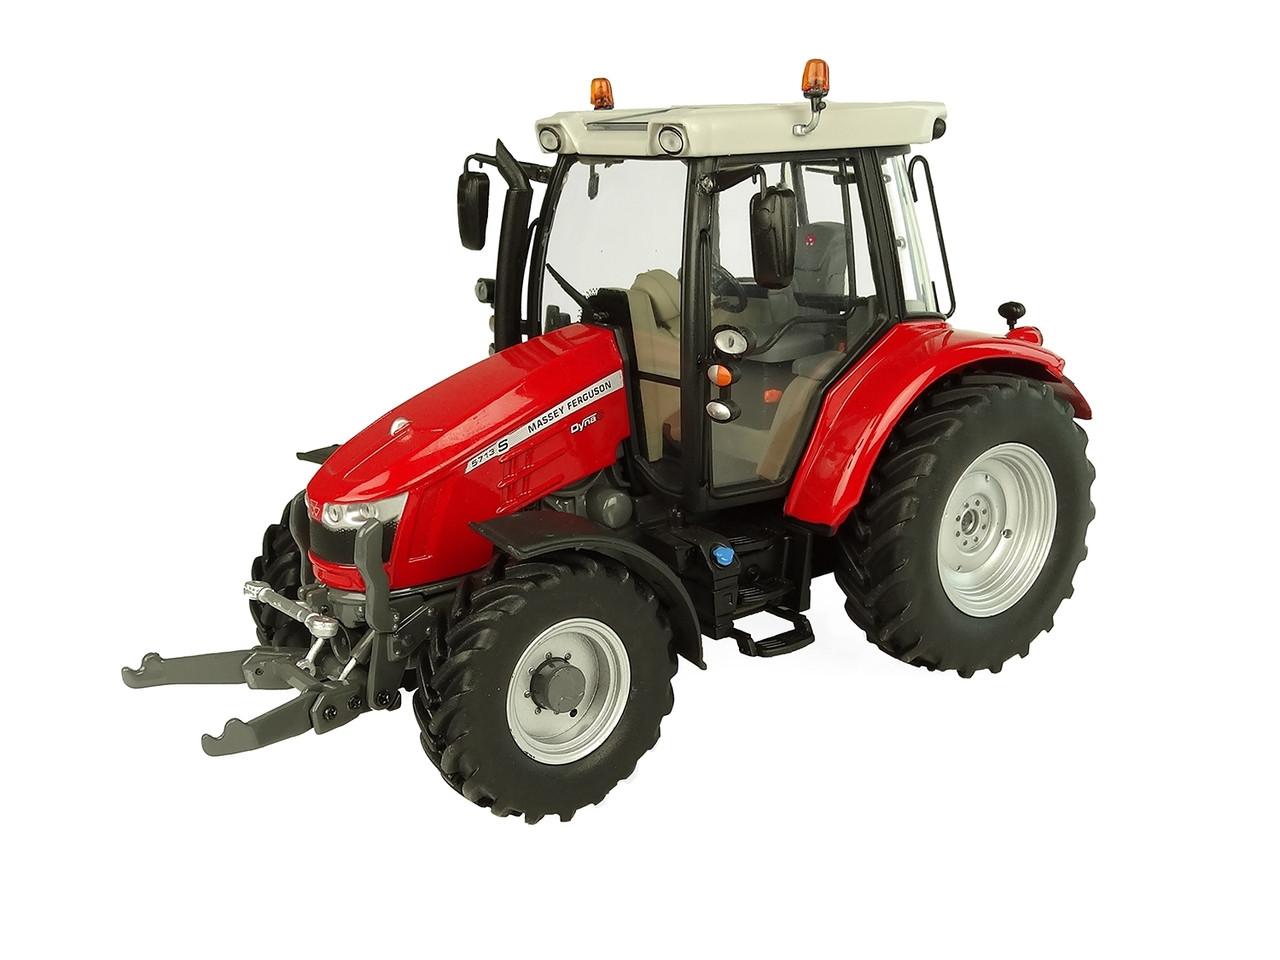 TOY MODEL TRACTOR Massey Ferguson 135  1/32nd Scale By Universal Hobbies 